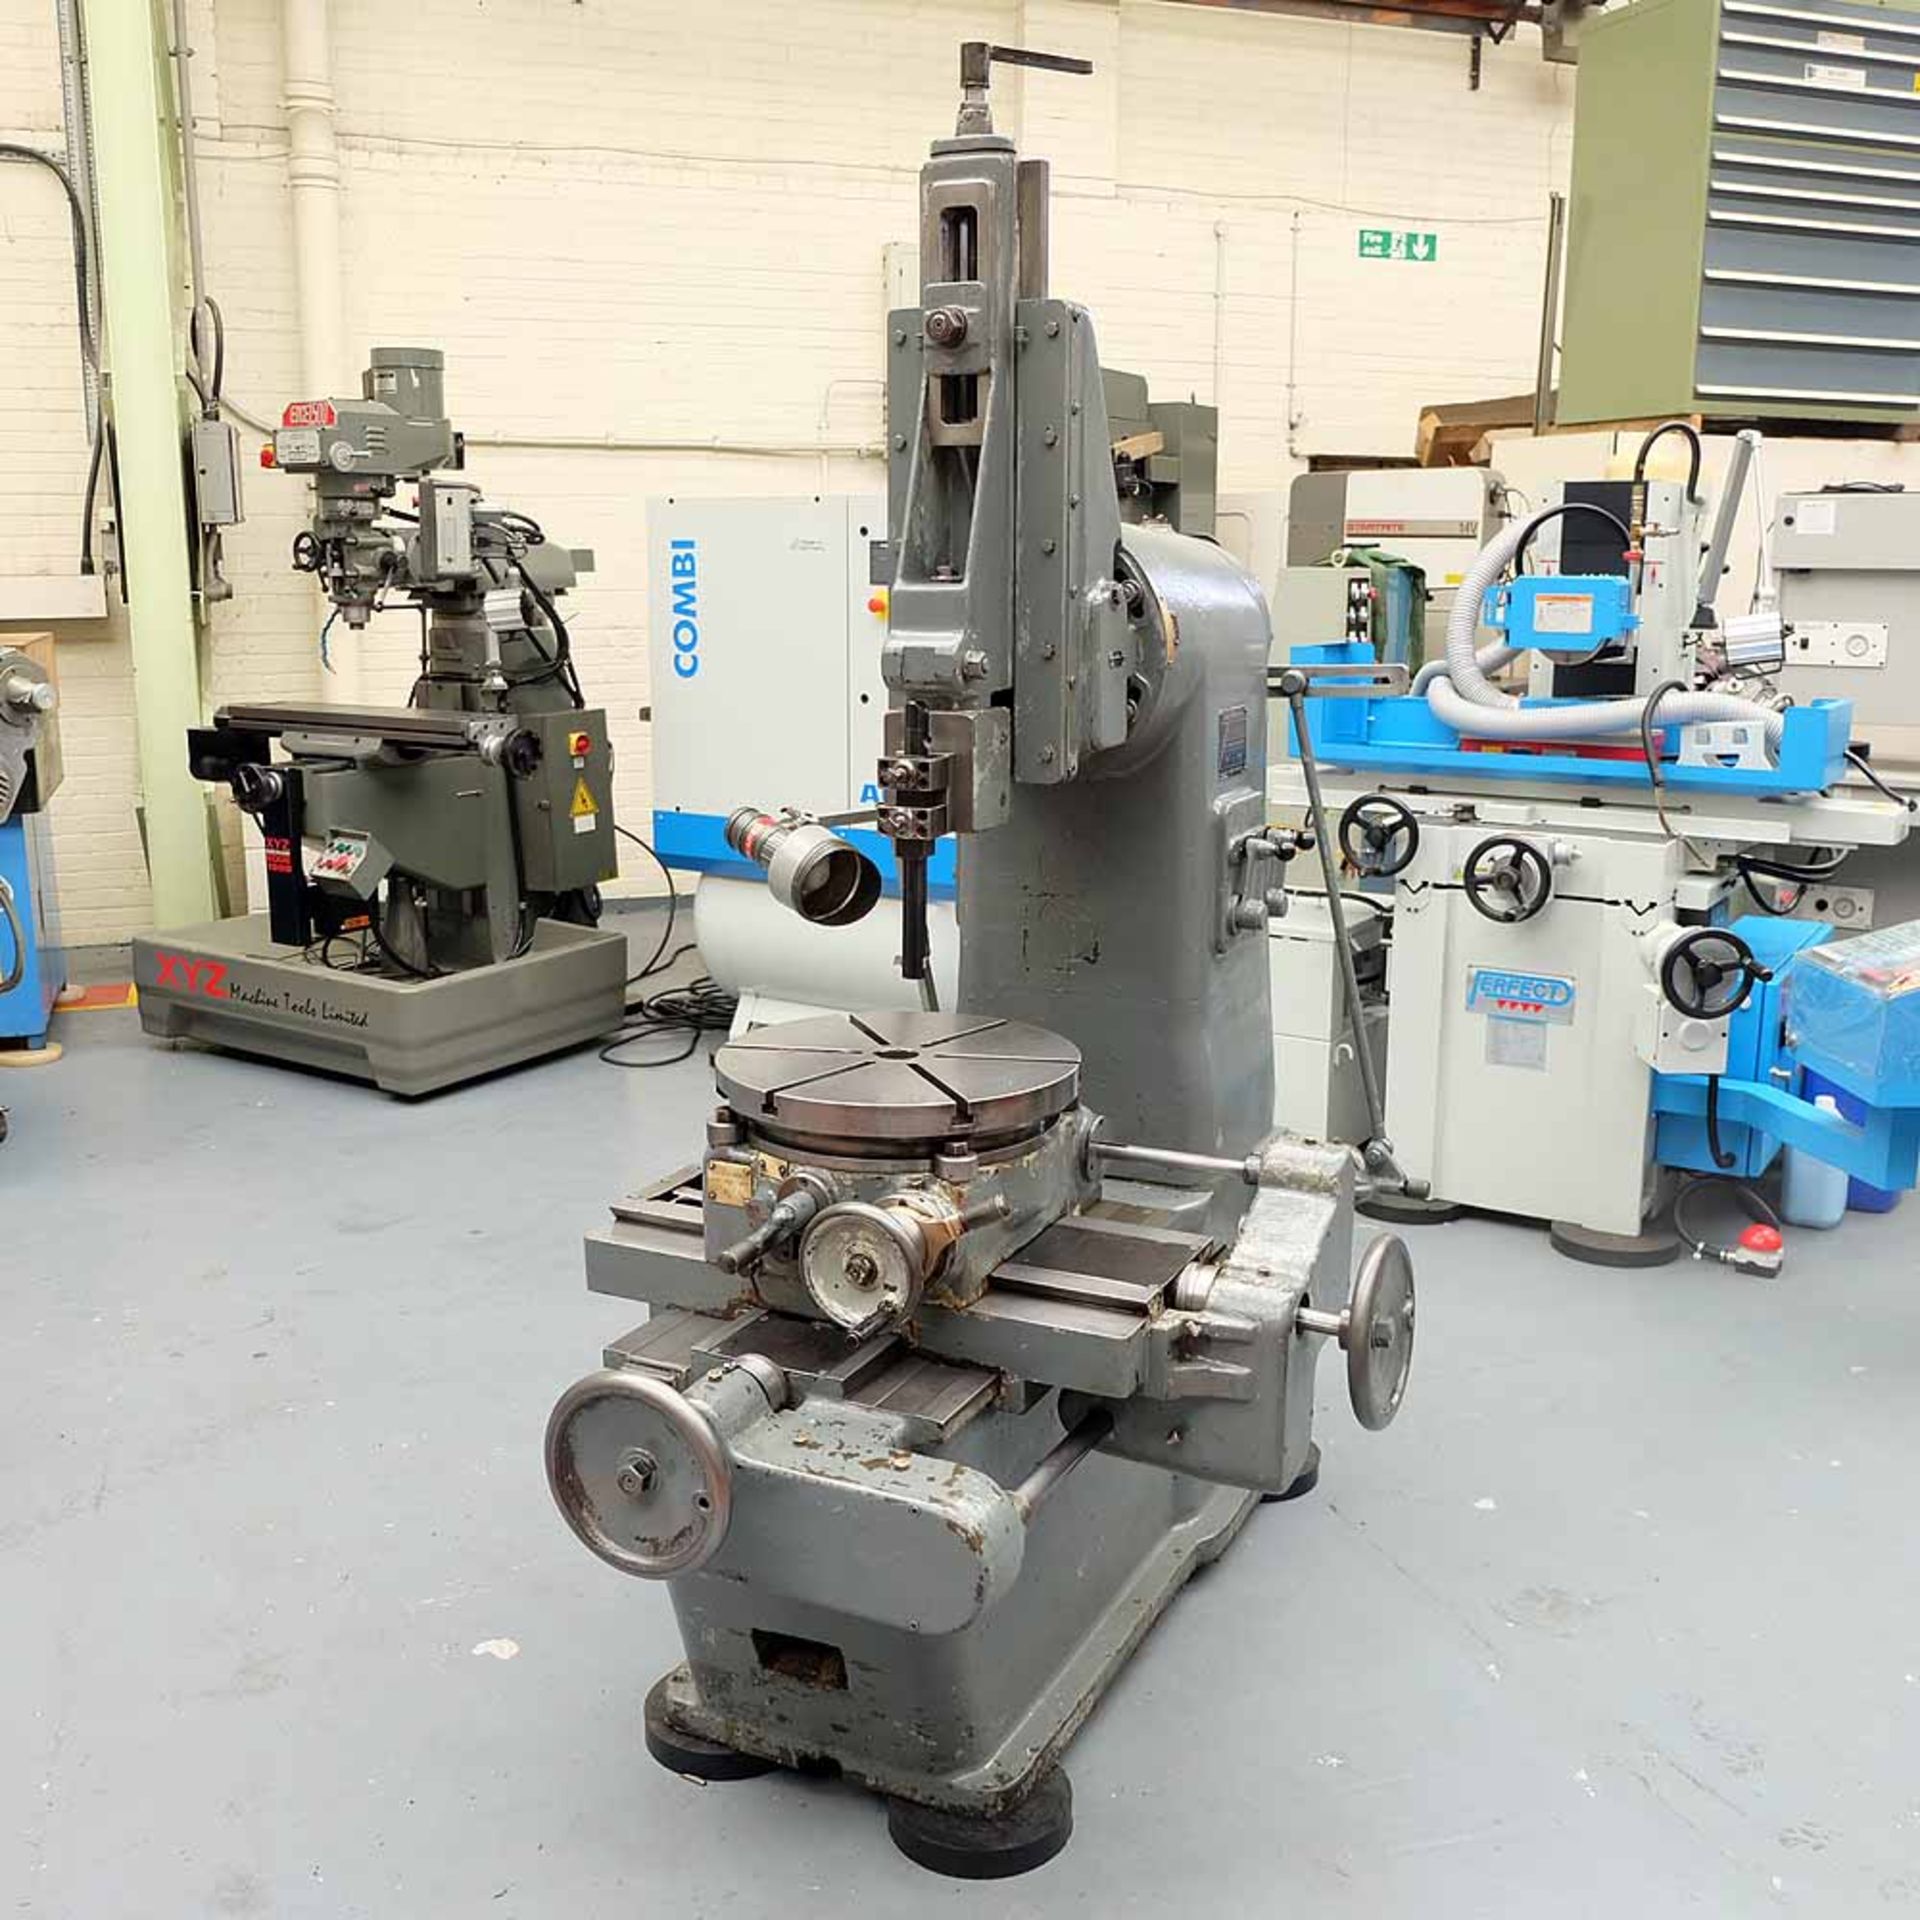 Burdett 6" Slotting Machine with Indexing Rotating Table. Table Size: 18" Diameter.